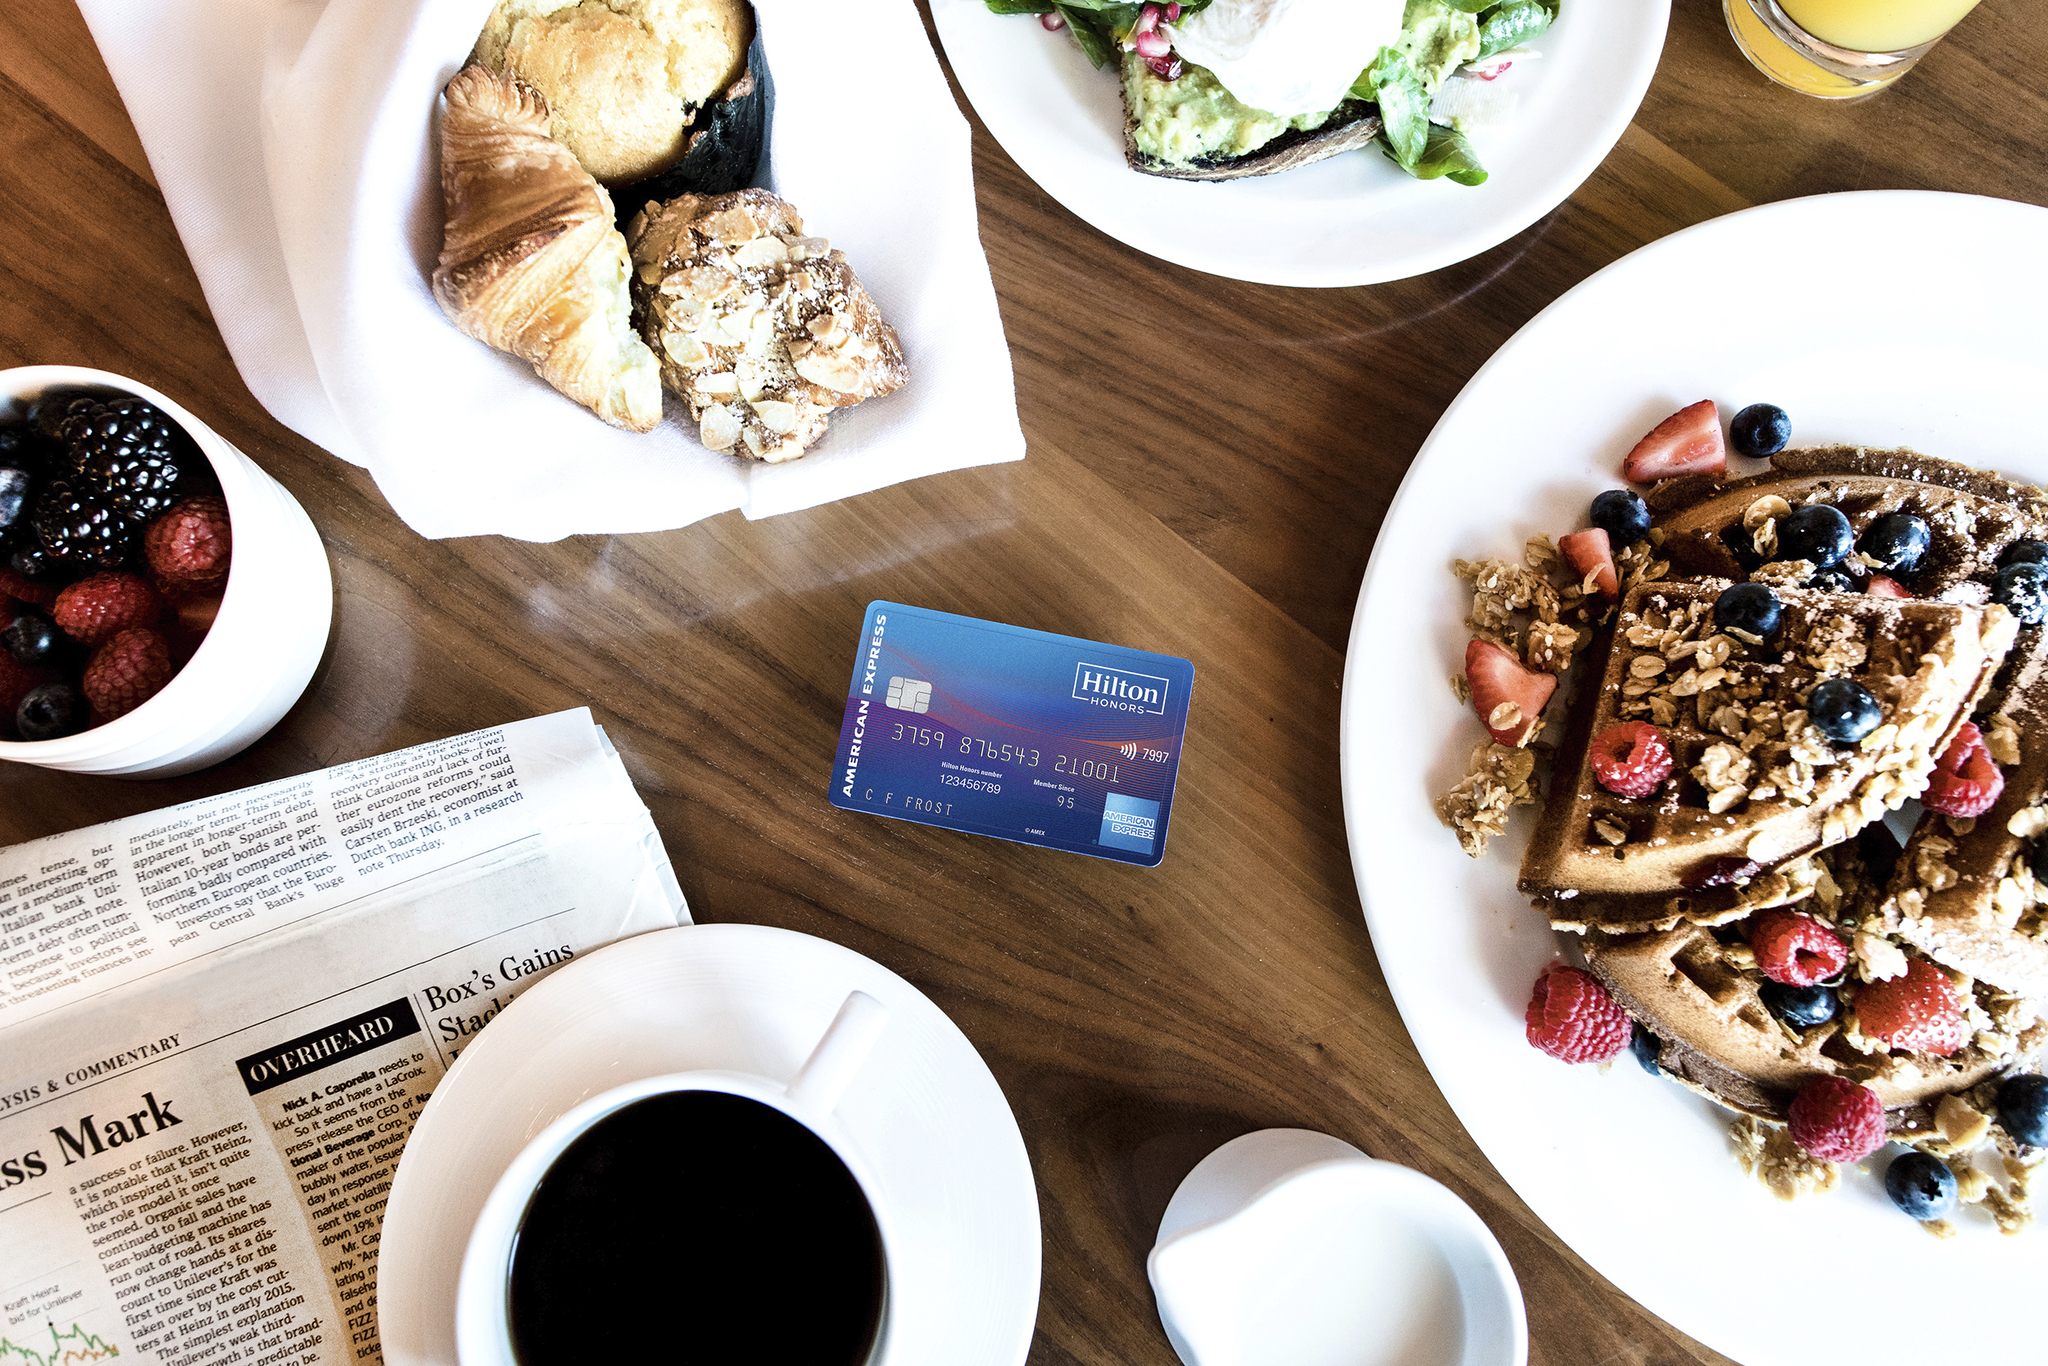 Increased Offers for Amex Hilton Cards